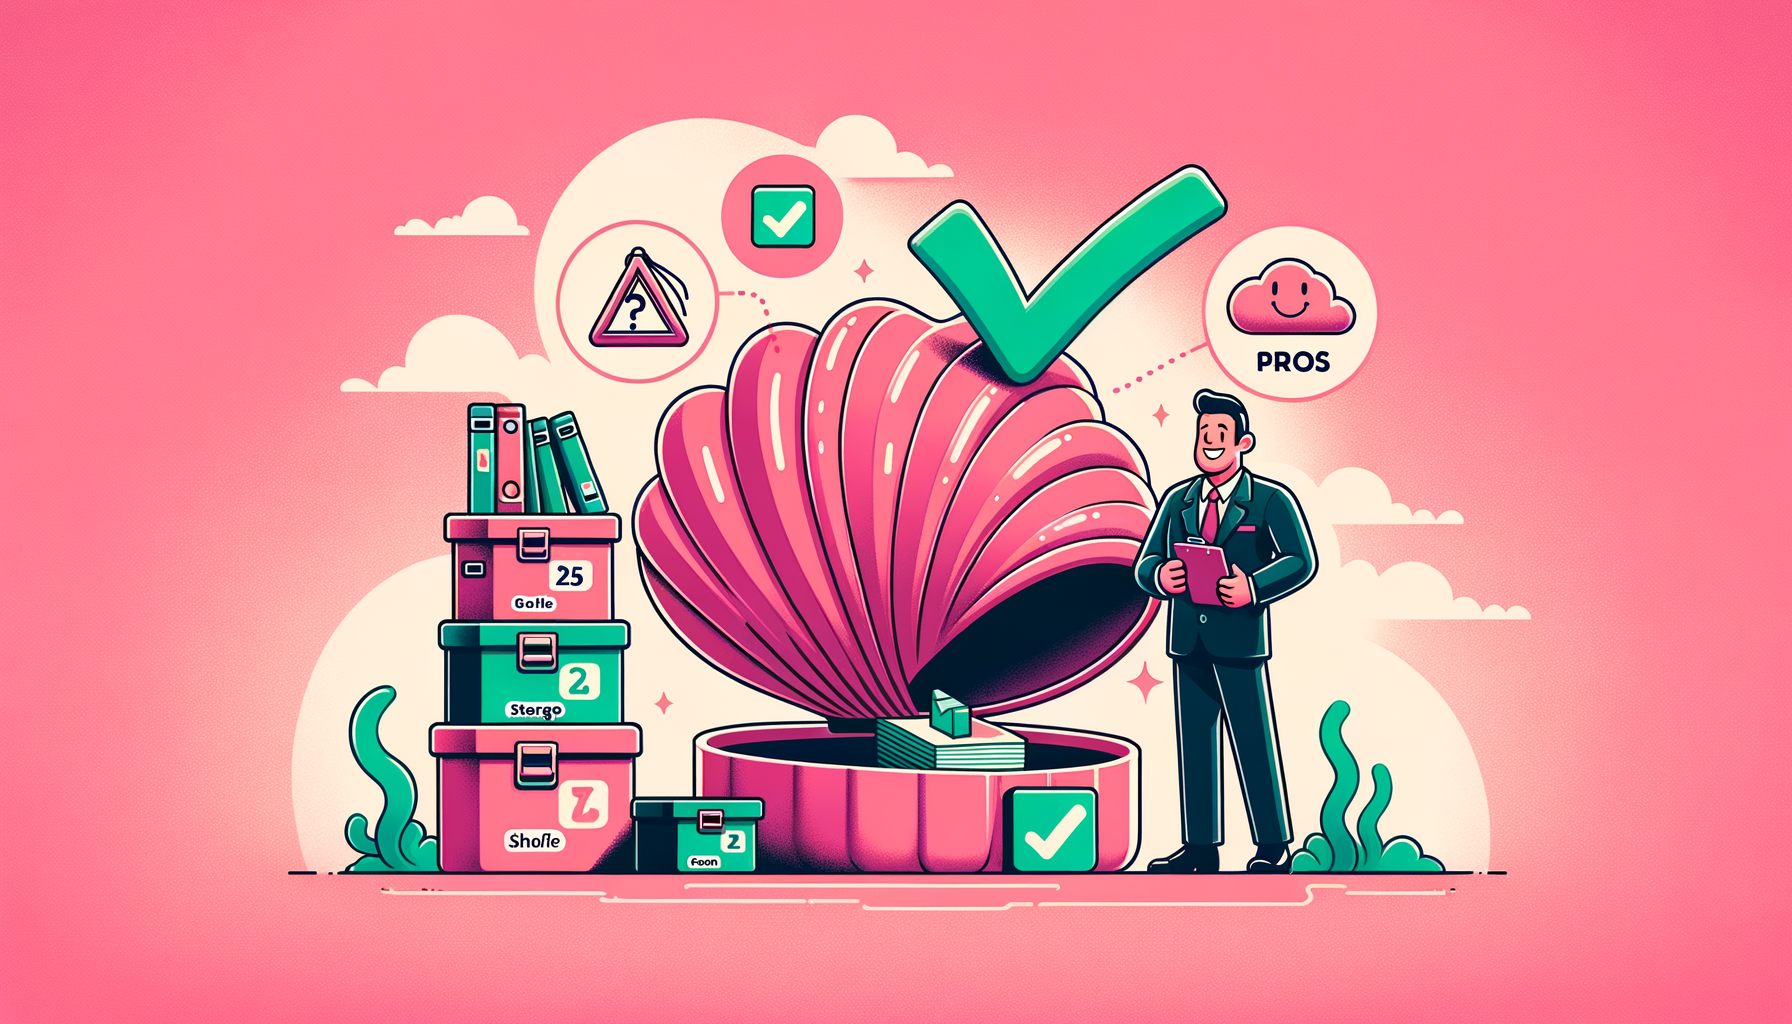 Cartoon illustration of a fuschia-colored Zippy Shell storage unit highlighting its benefits, with animated characters efficiently organizing belongings inside.